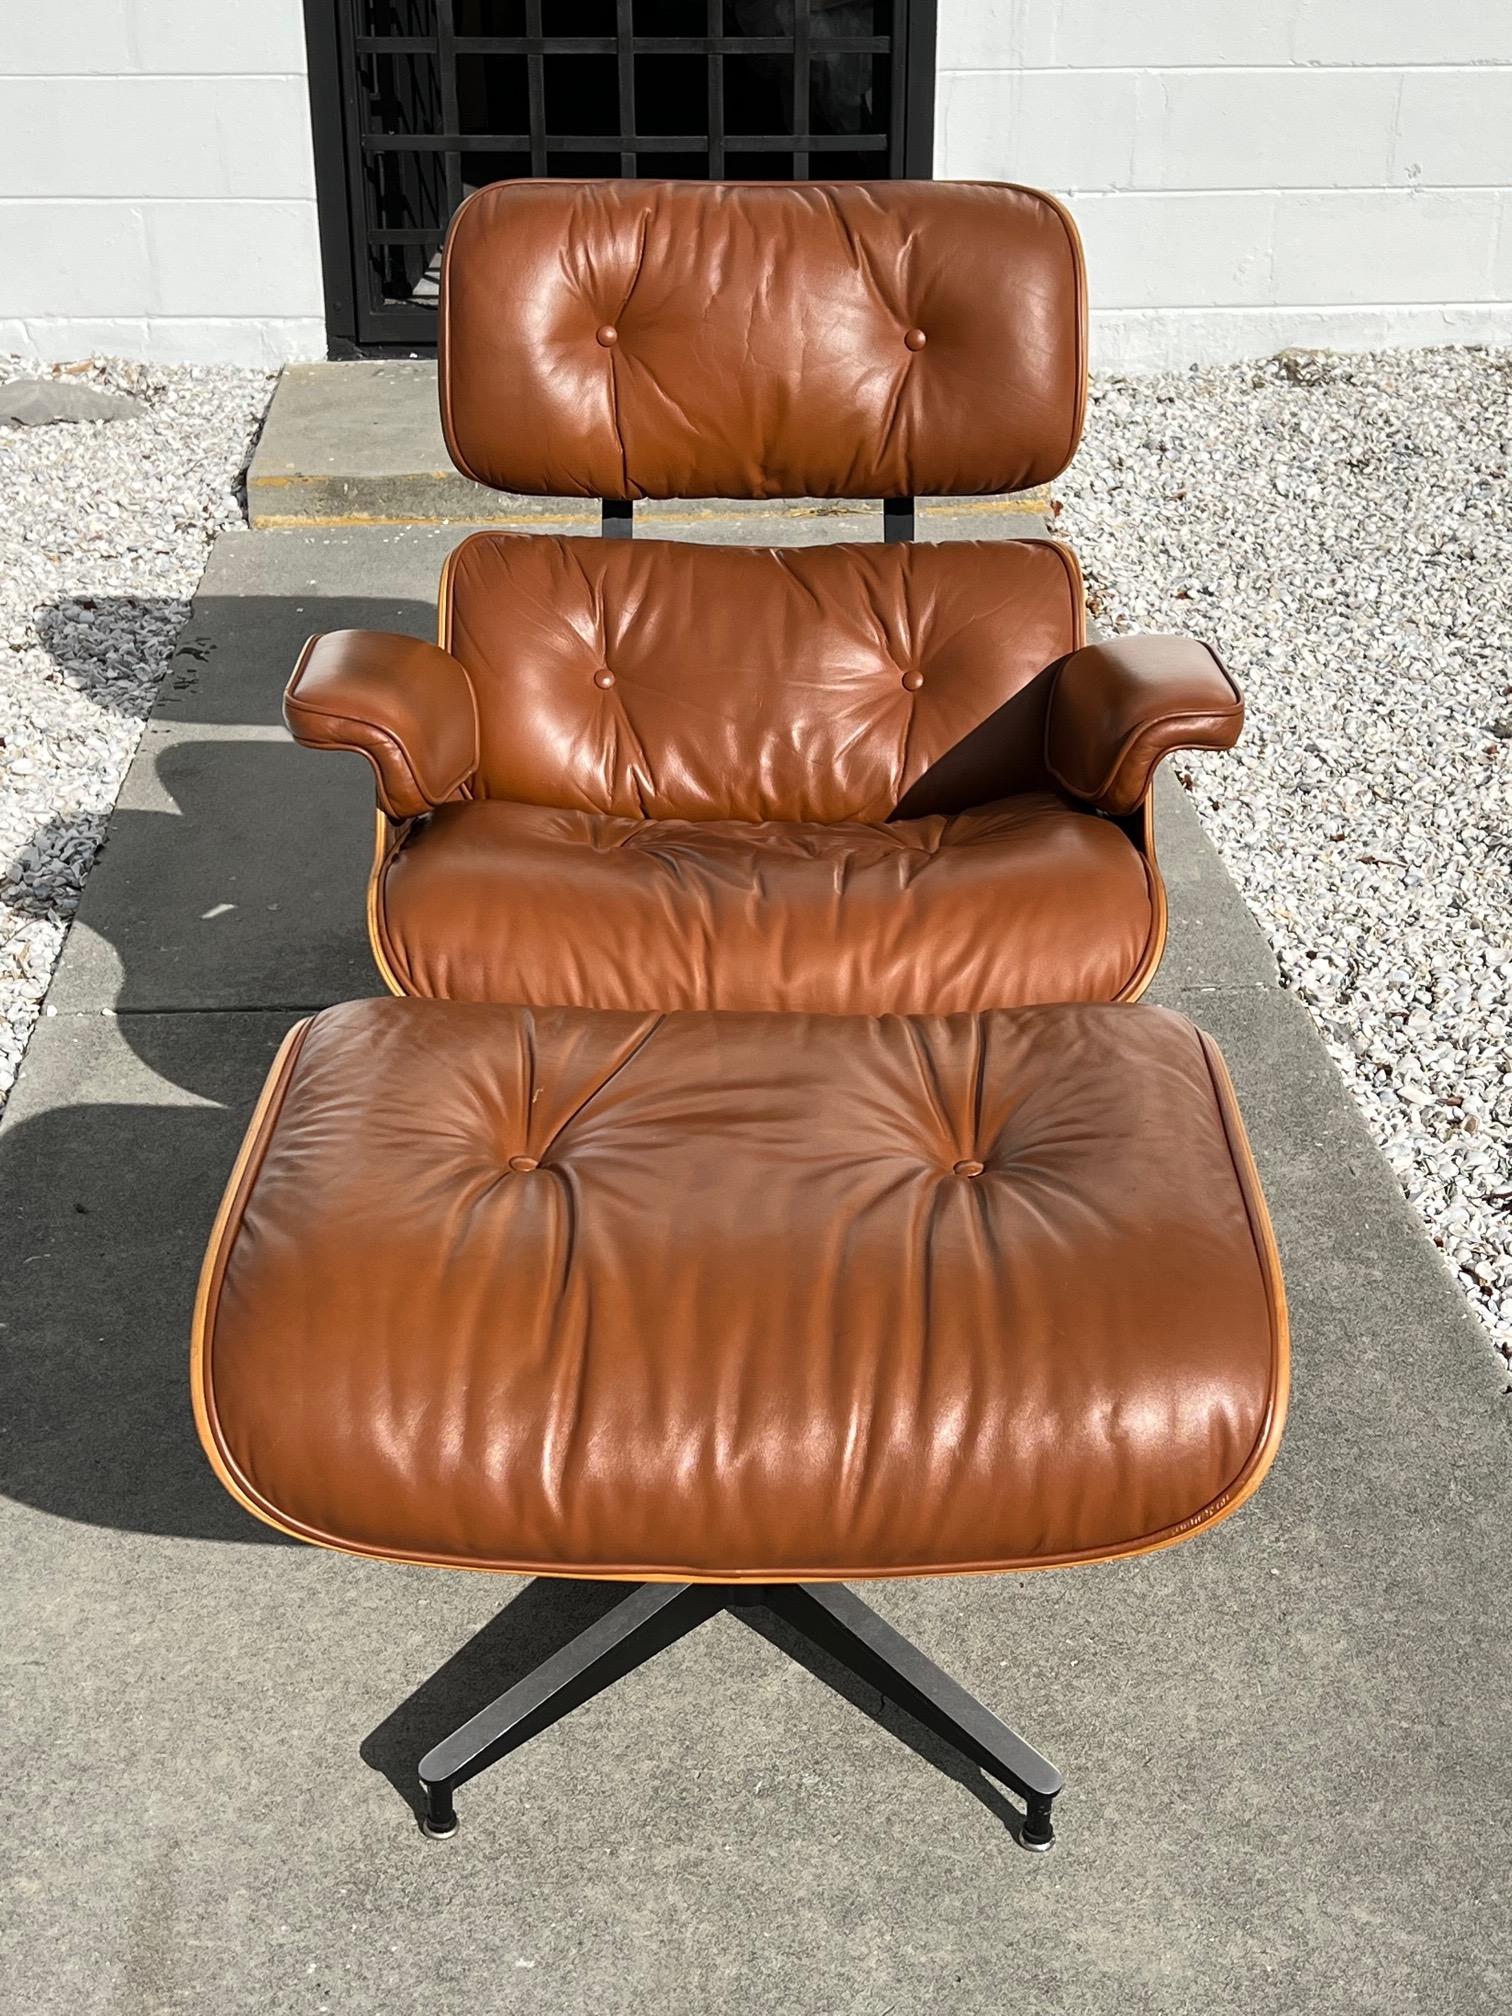 Classic Charles Eames Herman Miller Lounge Chair 1980's Cognac Brown Leather 2